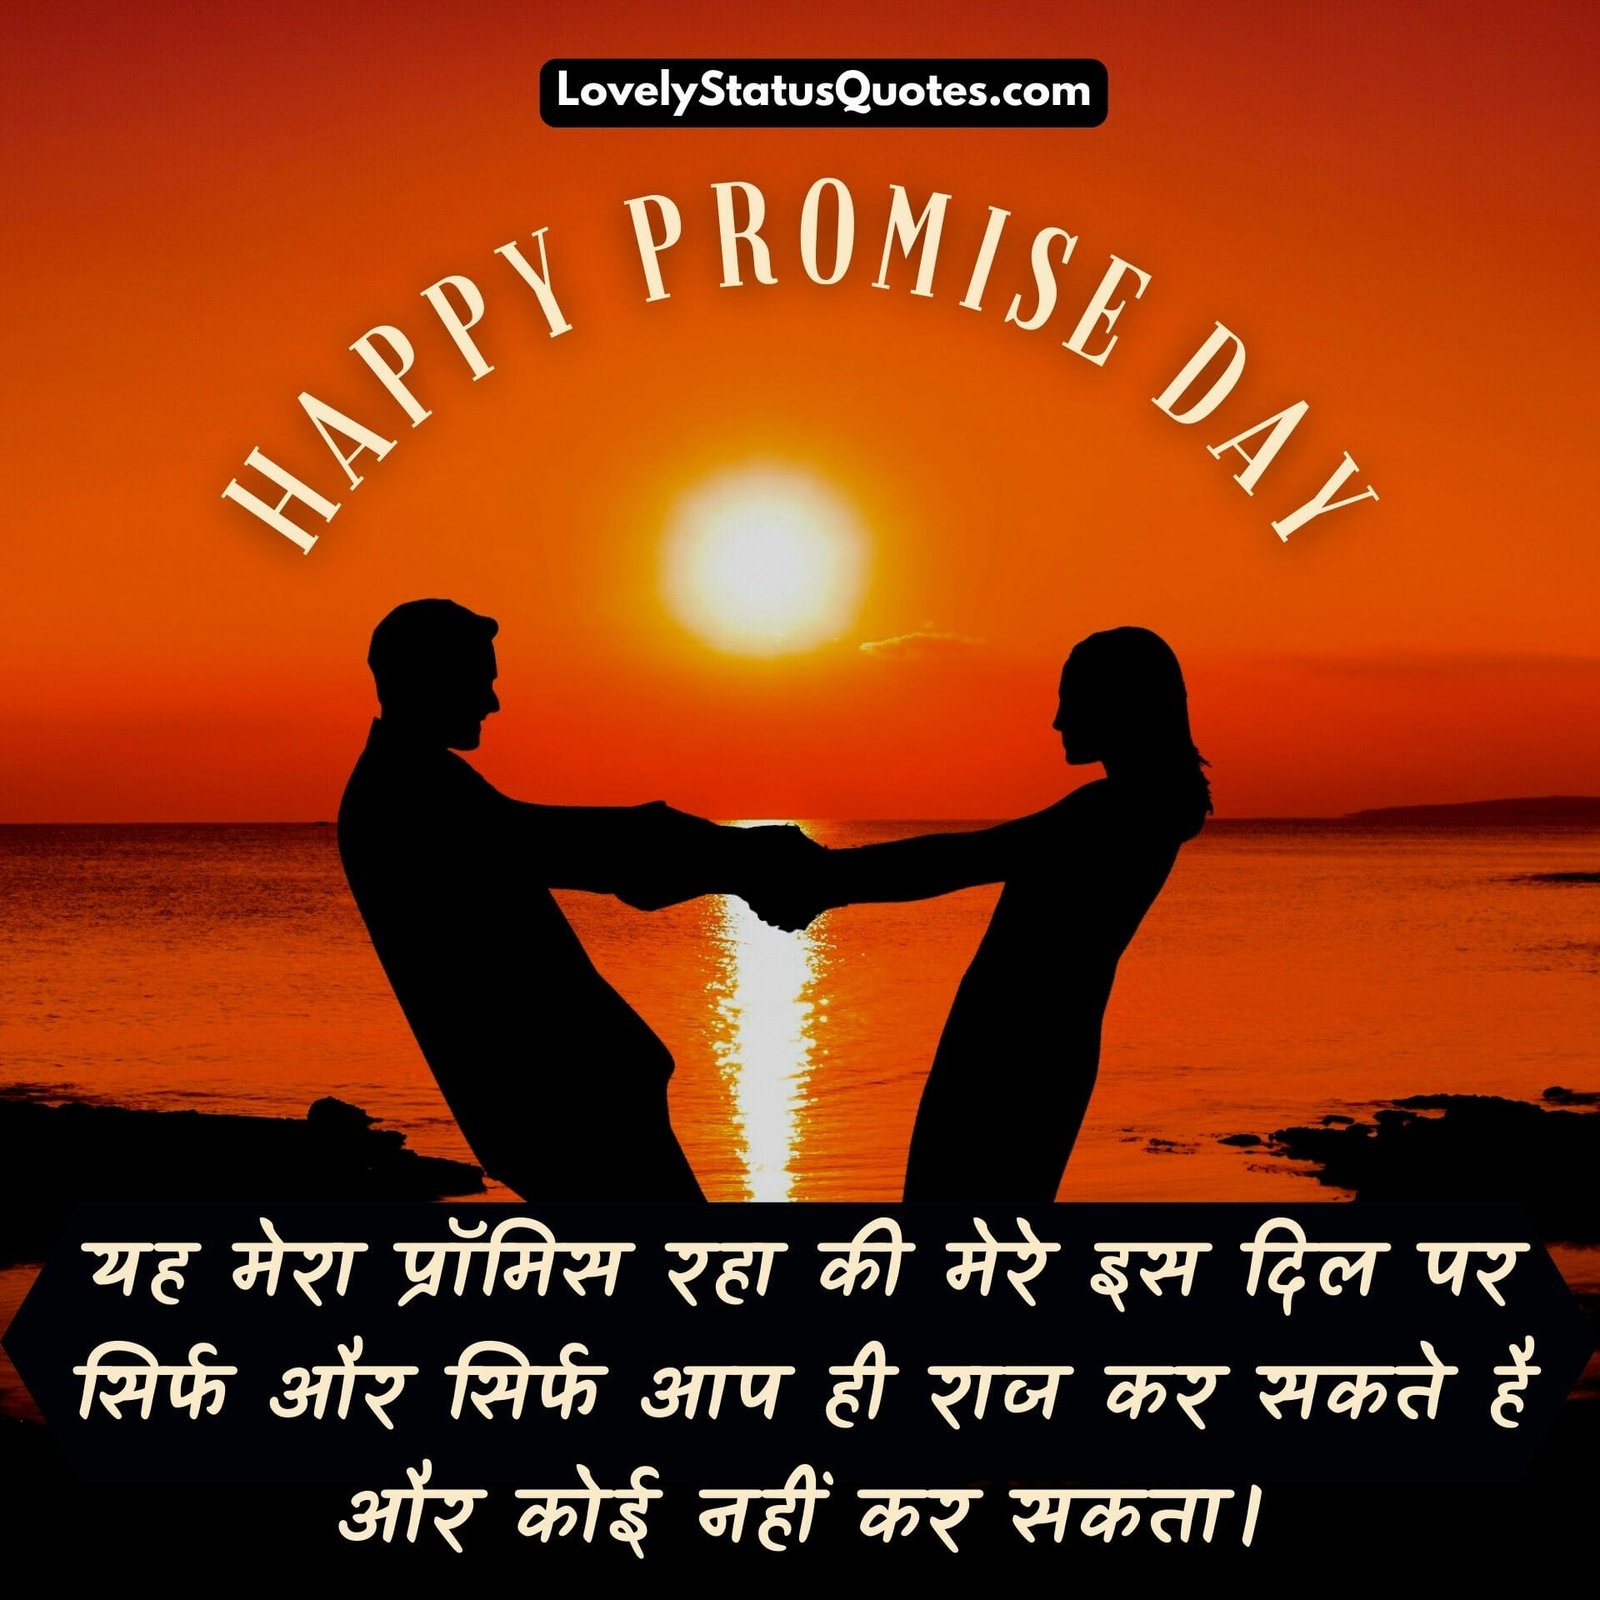 happy promise day status in hindi